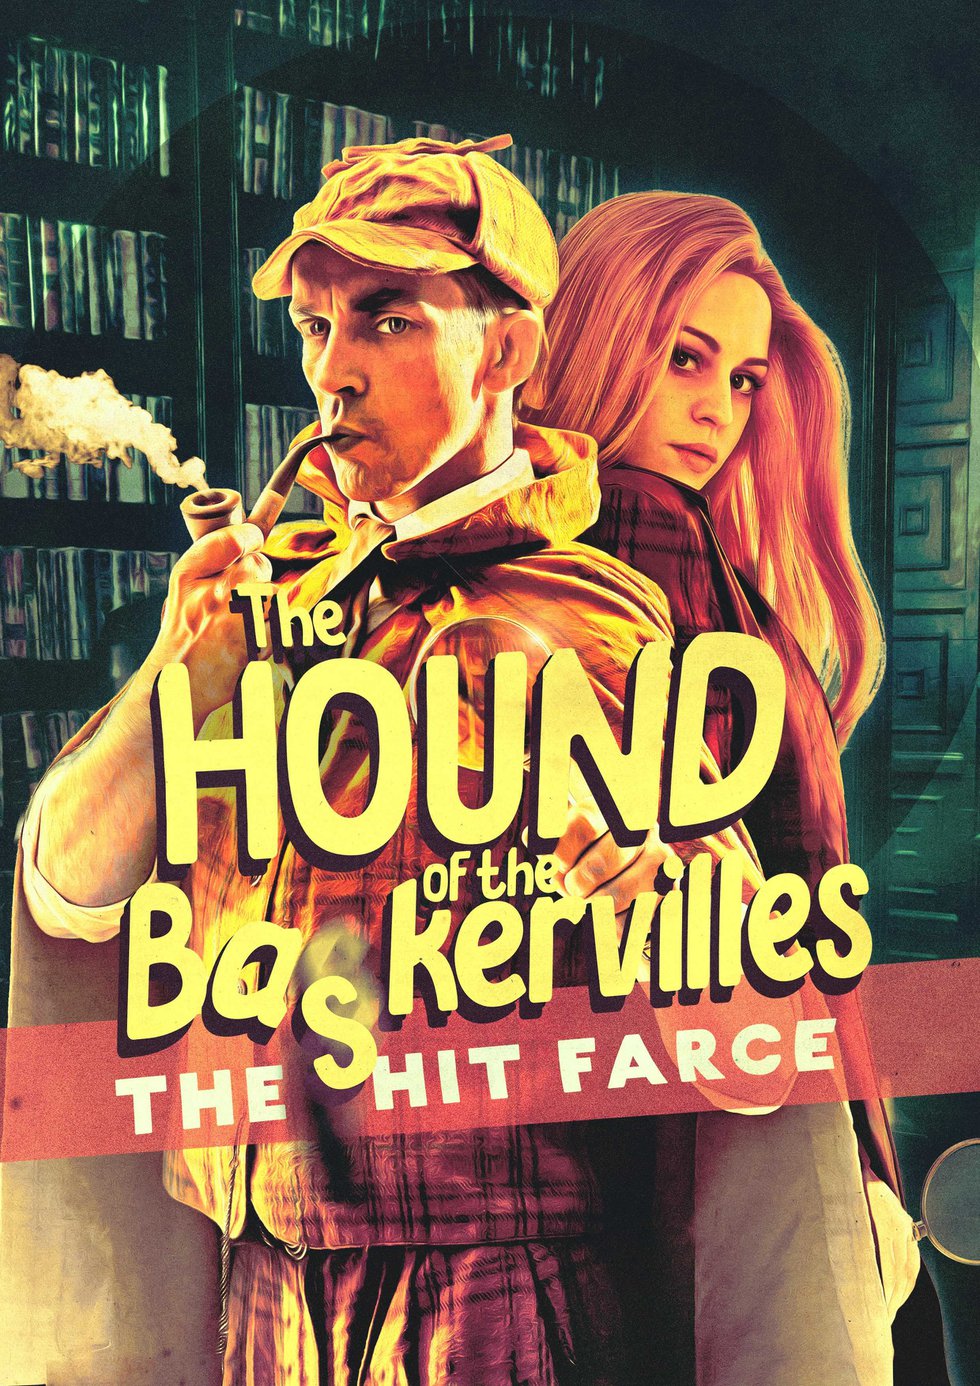 YAT MILL STUDIO The Hound of the Baskervilles.jpg